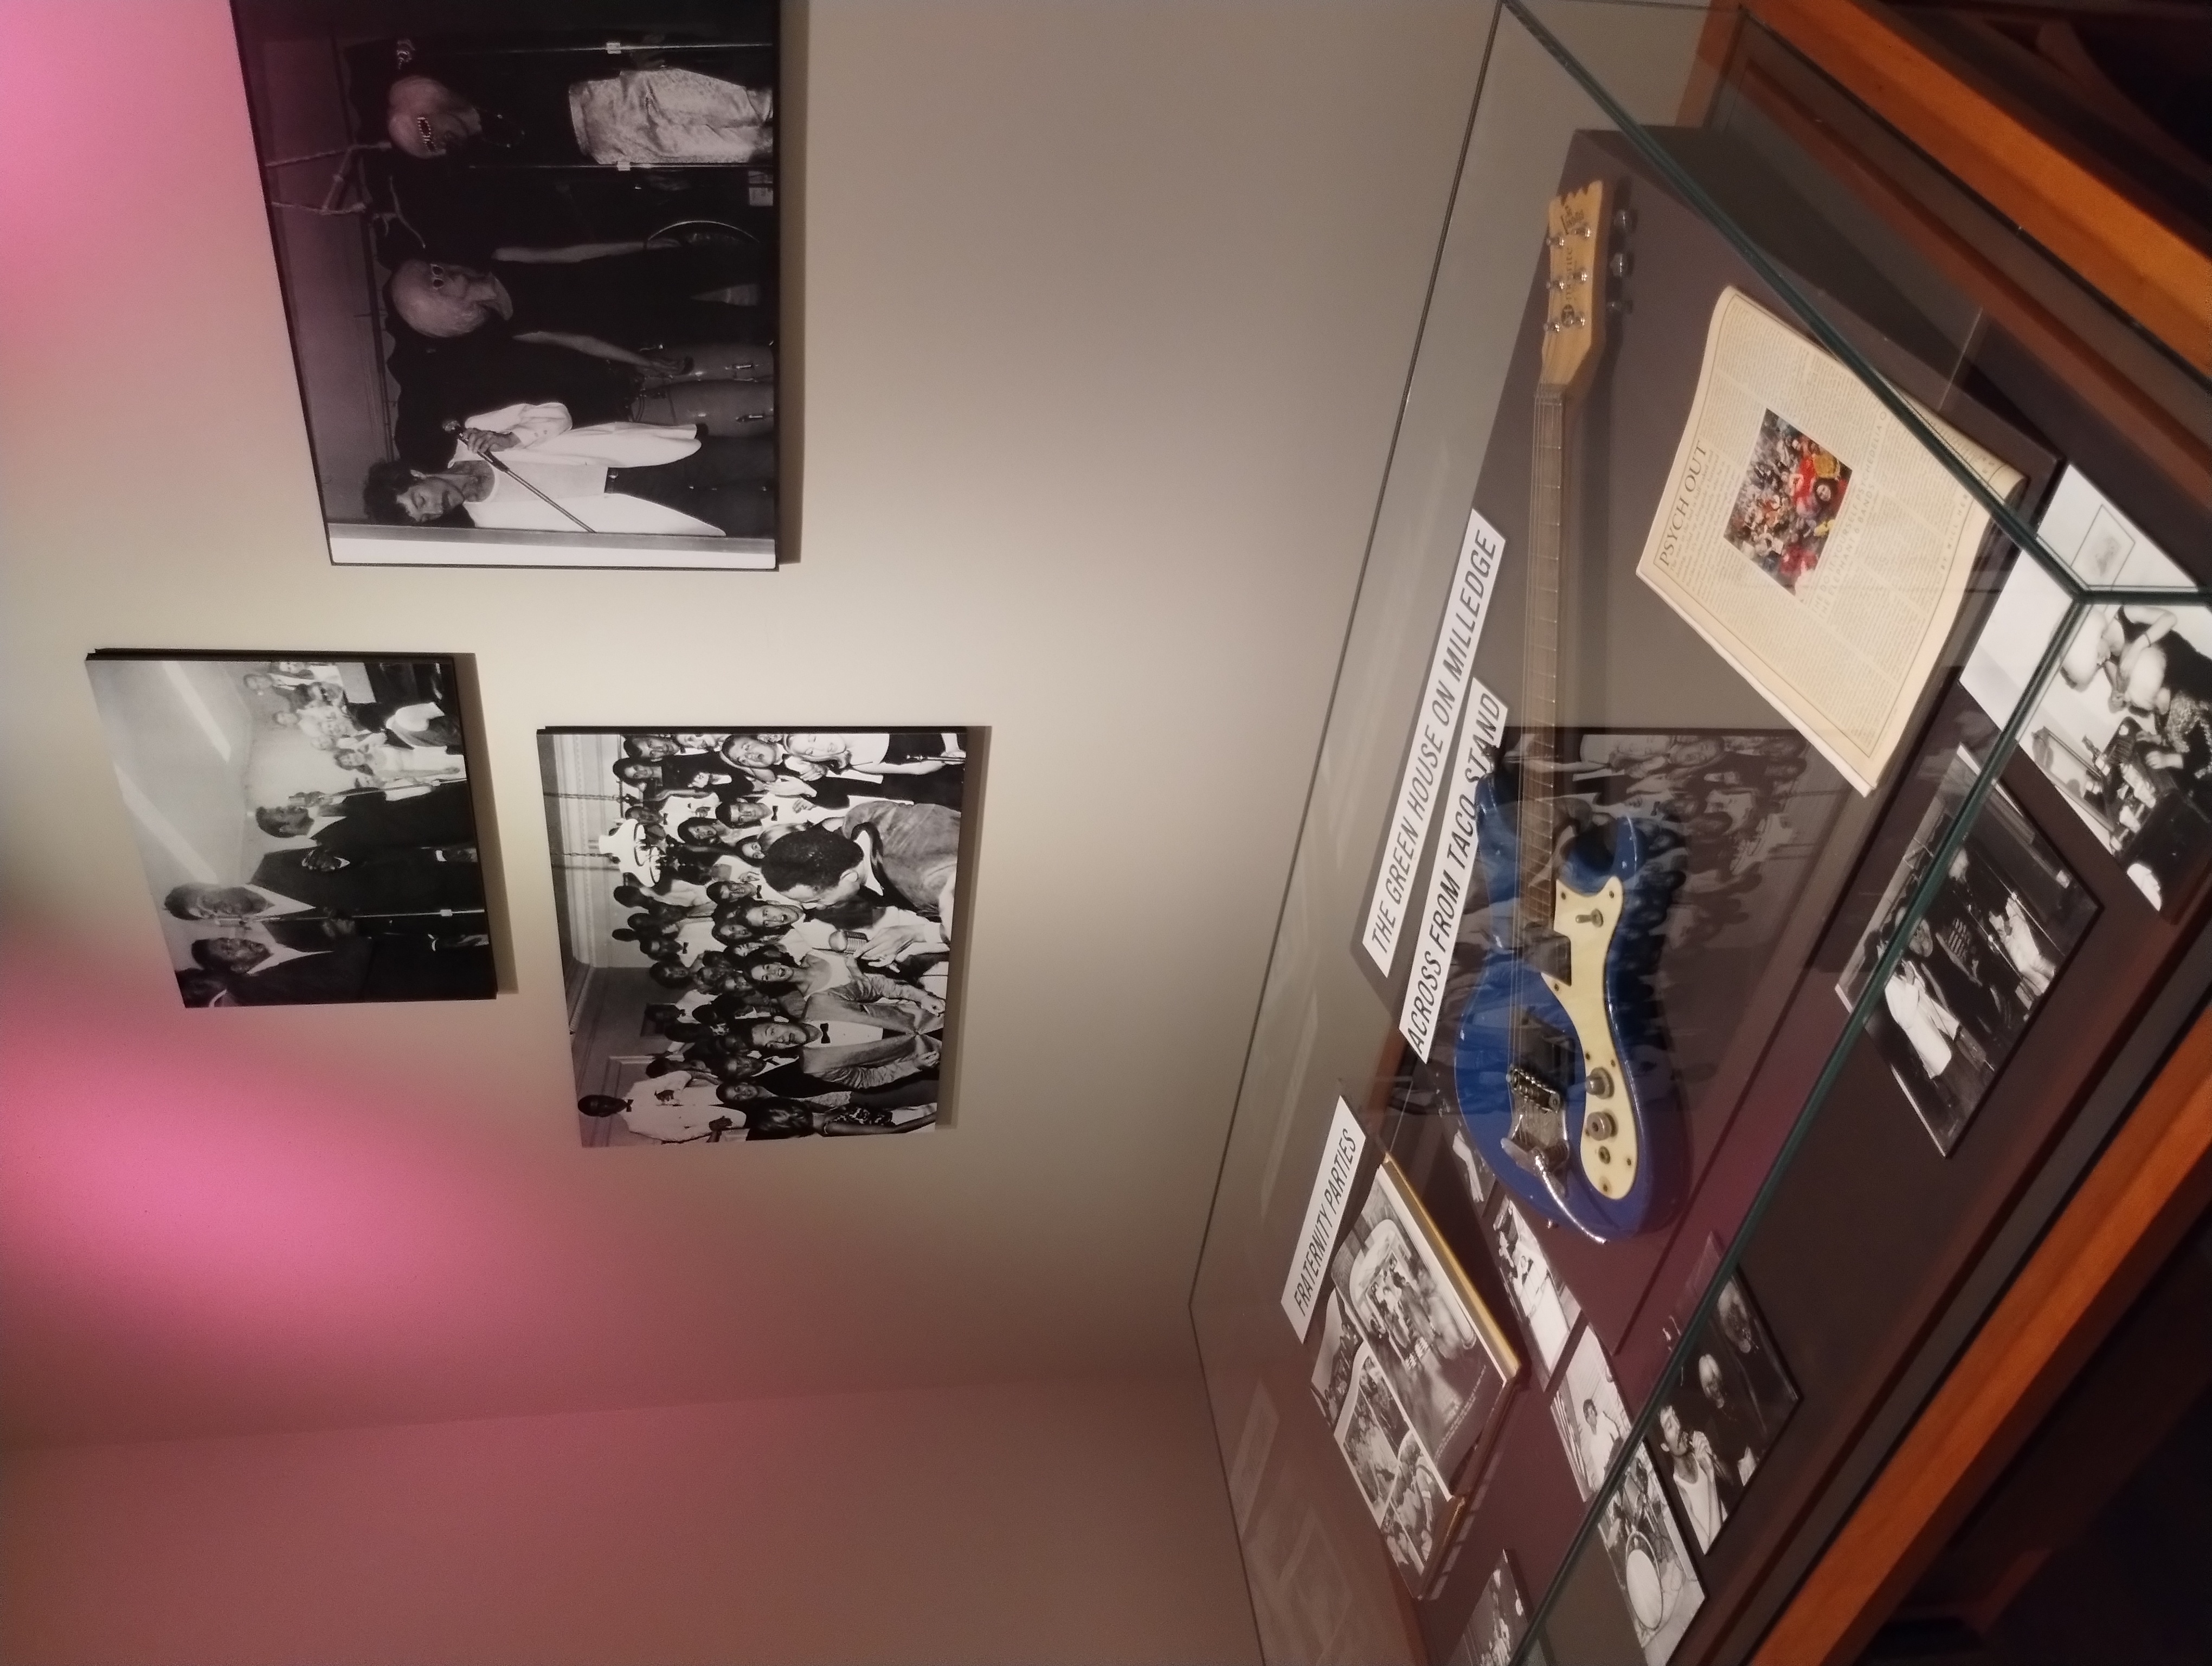 Photos and a guitar on display as party of an exhibit on House Parties in Athens